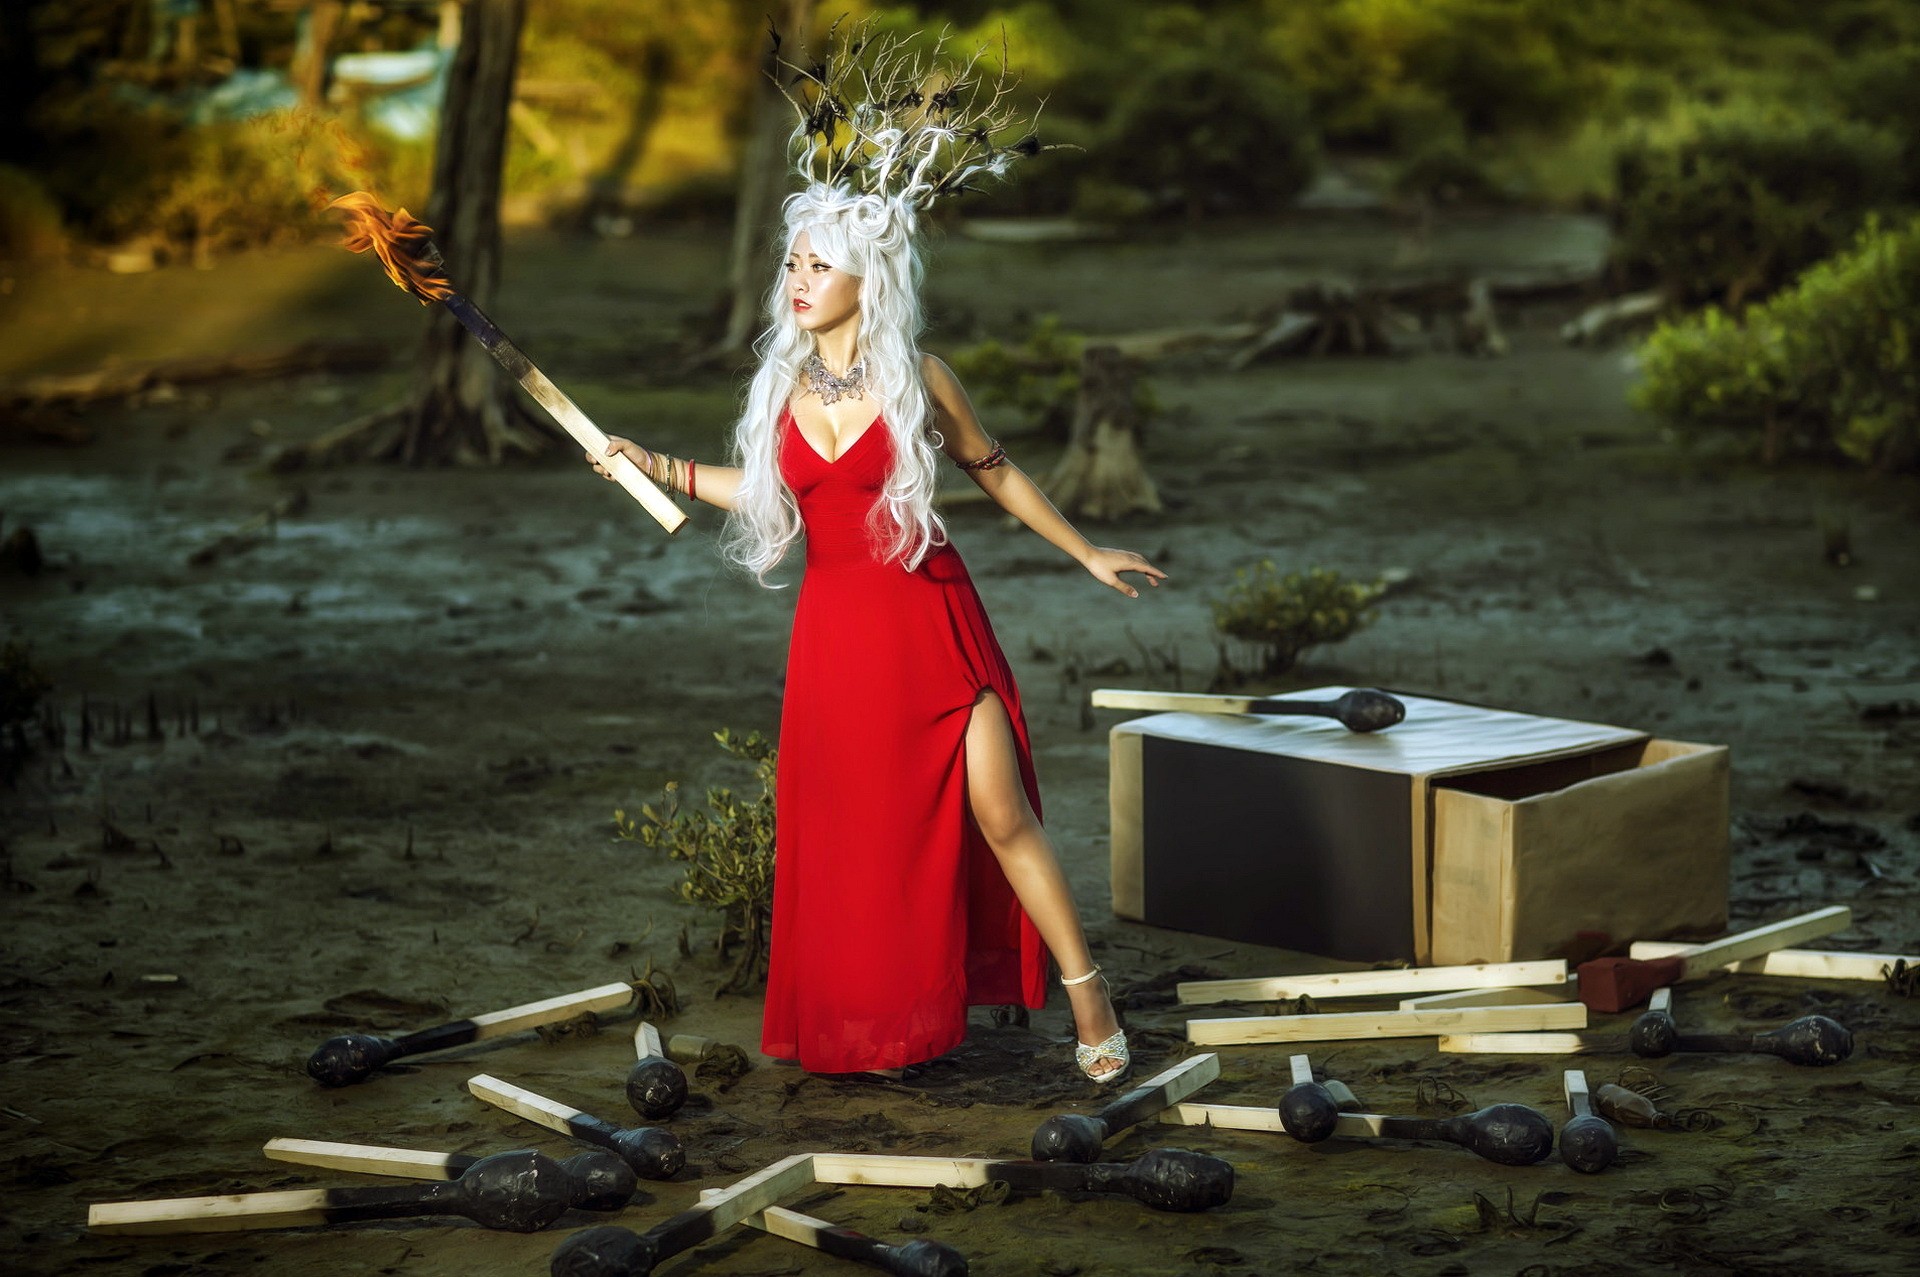 People 1920x1277 matches Asian women model white hair red dress matchstick red clothing dress cleavage long hair women outdoors fire burning legs collar red lipstick